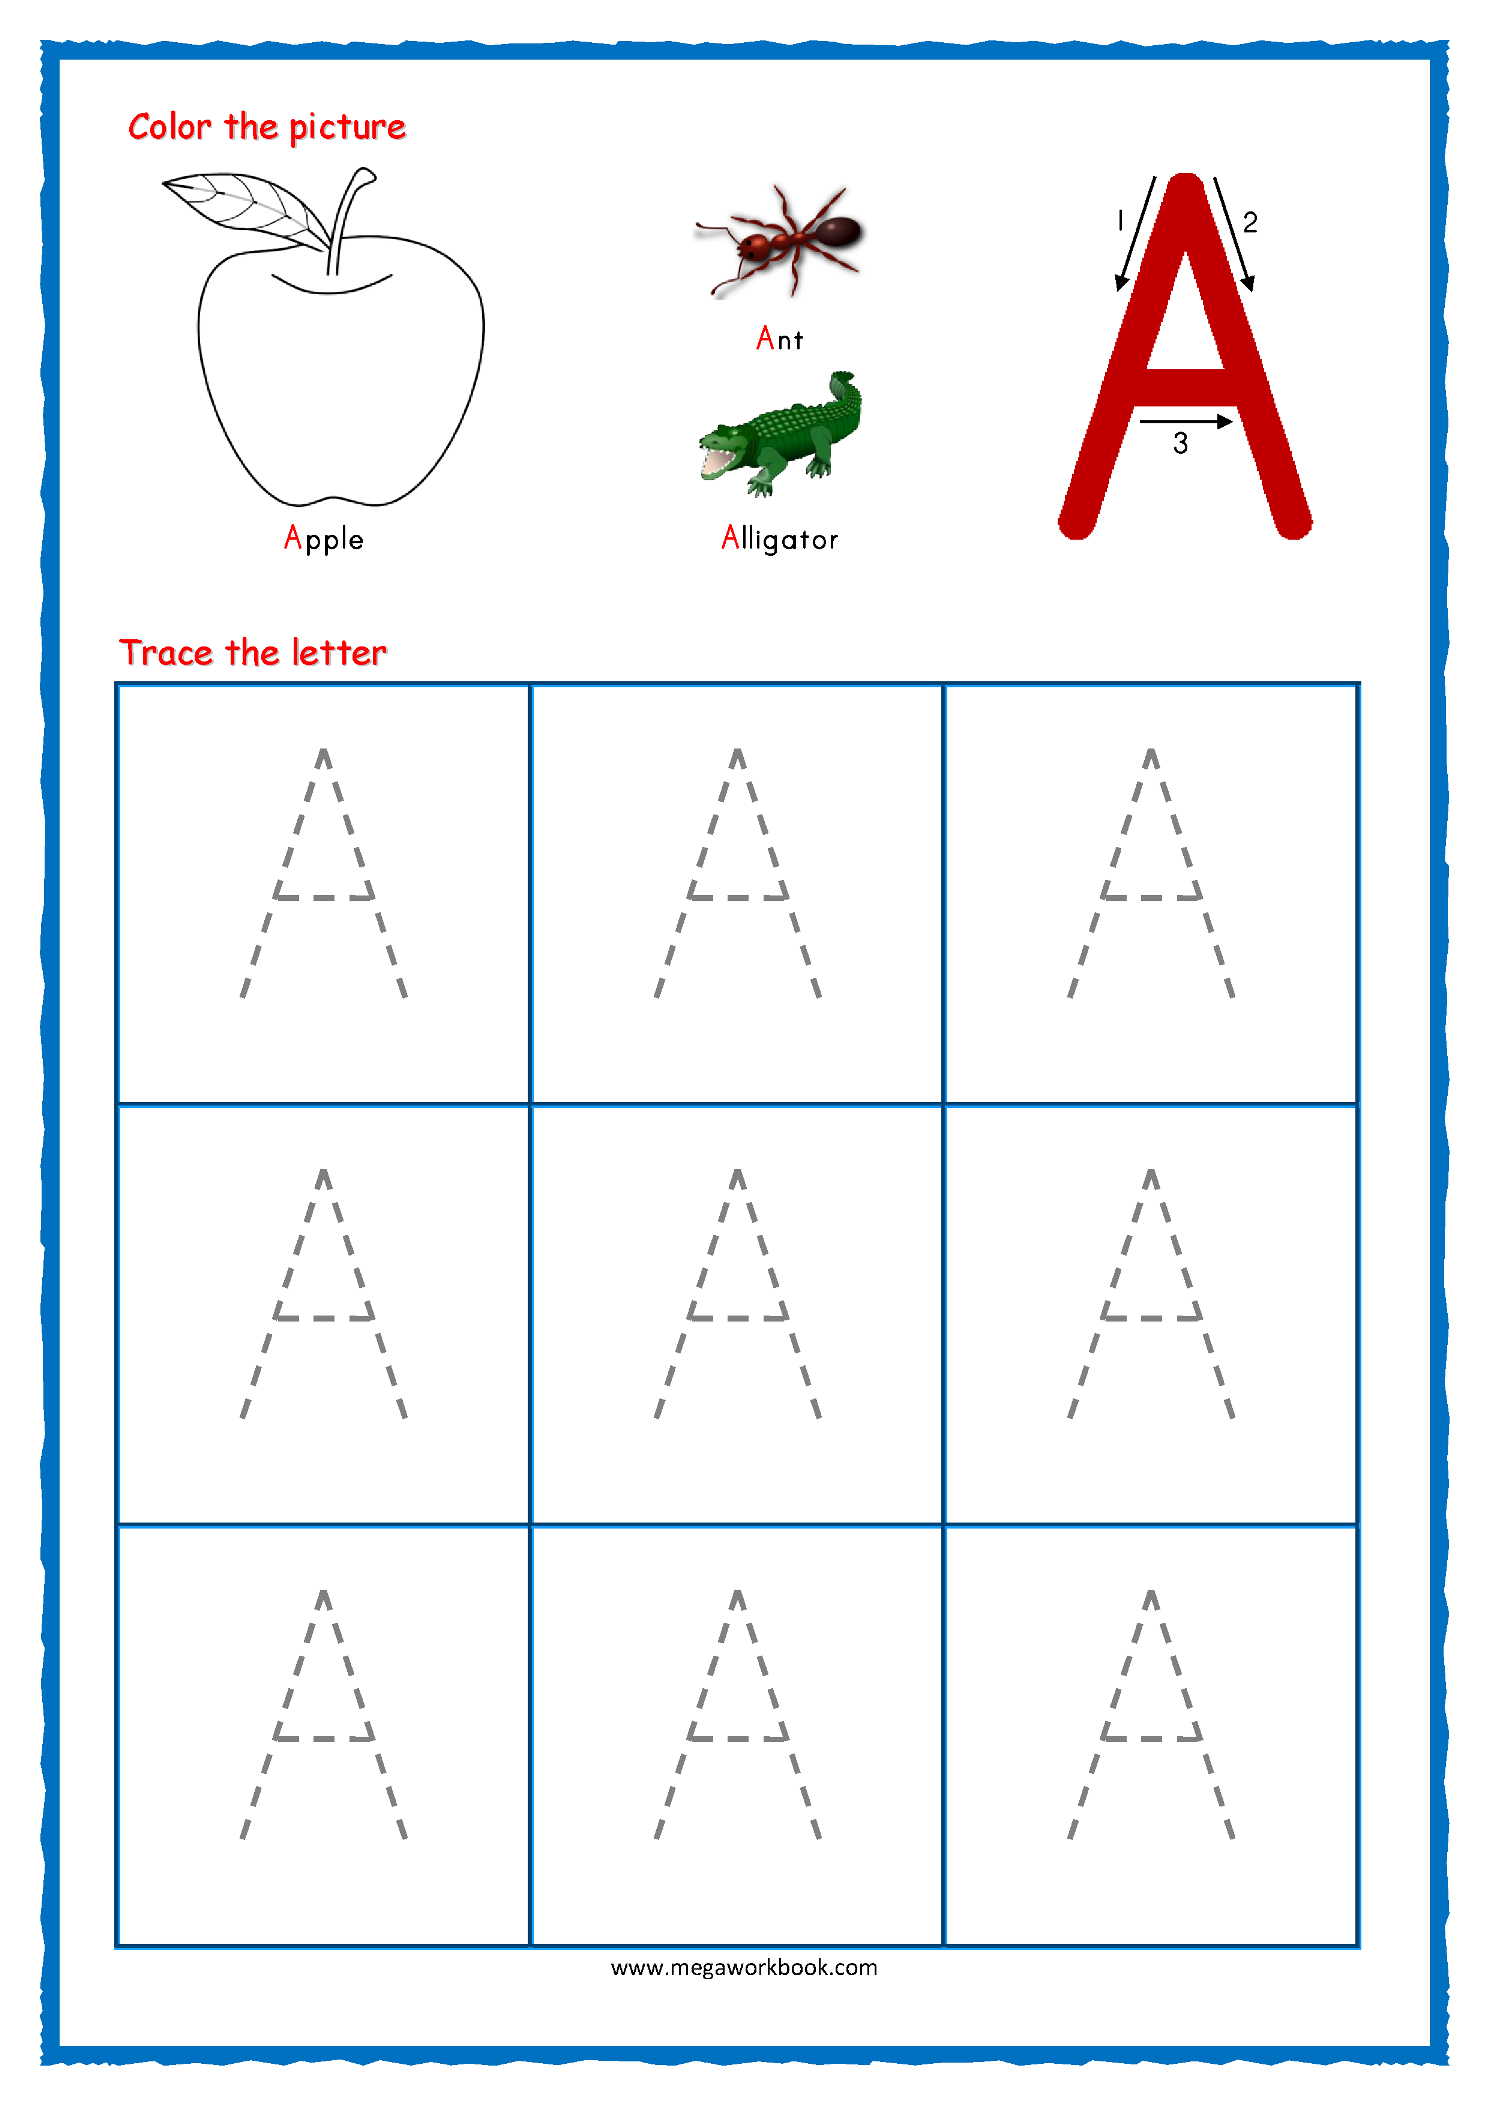 Coloring Book : Tracing Letters Alphabet Capitale Preschool intended for Free Online Tracing Letters